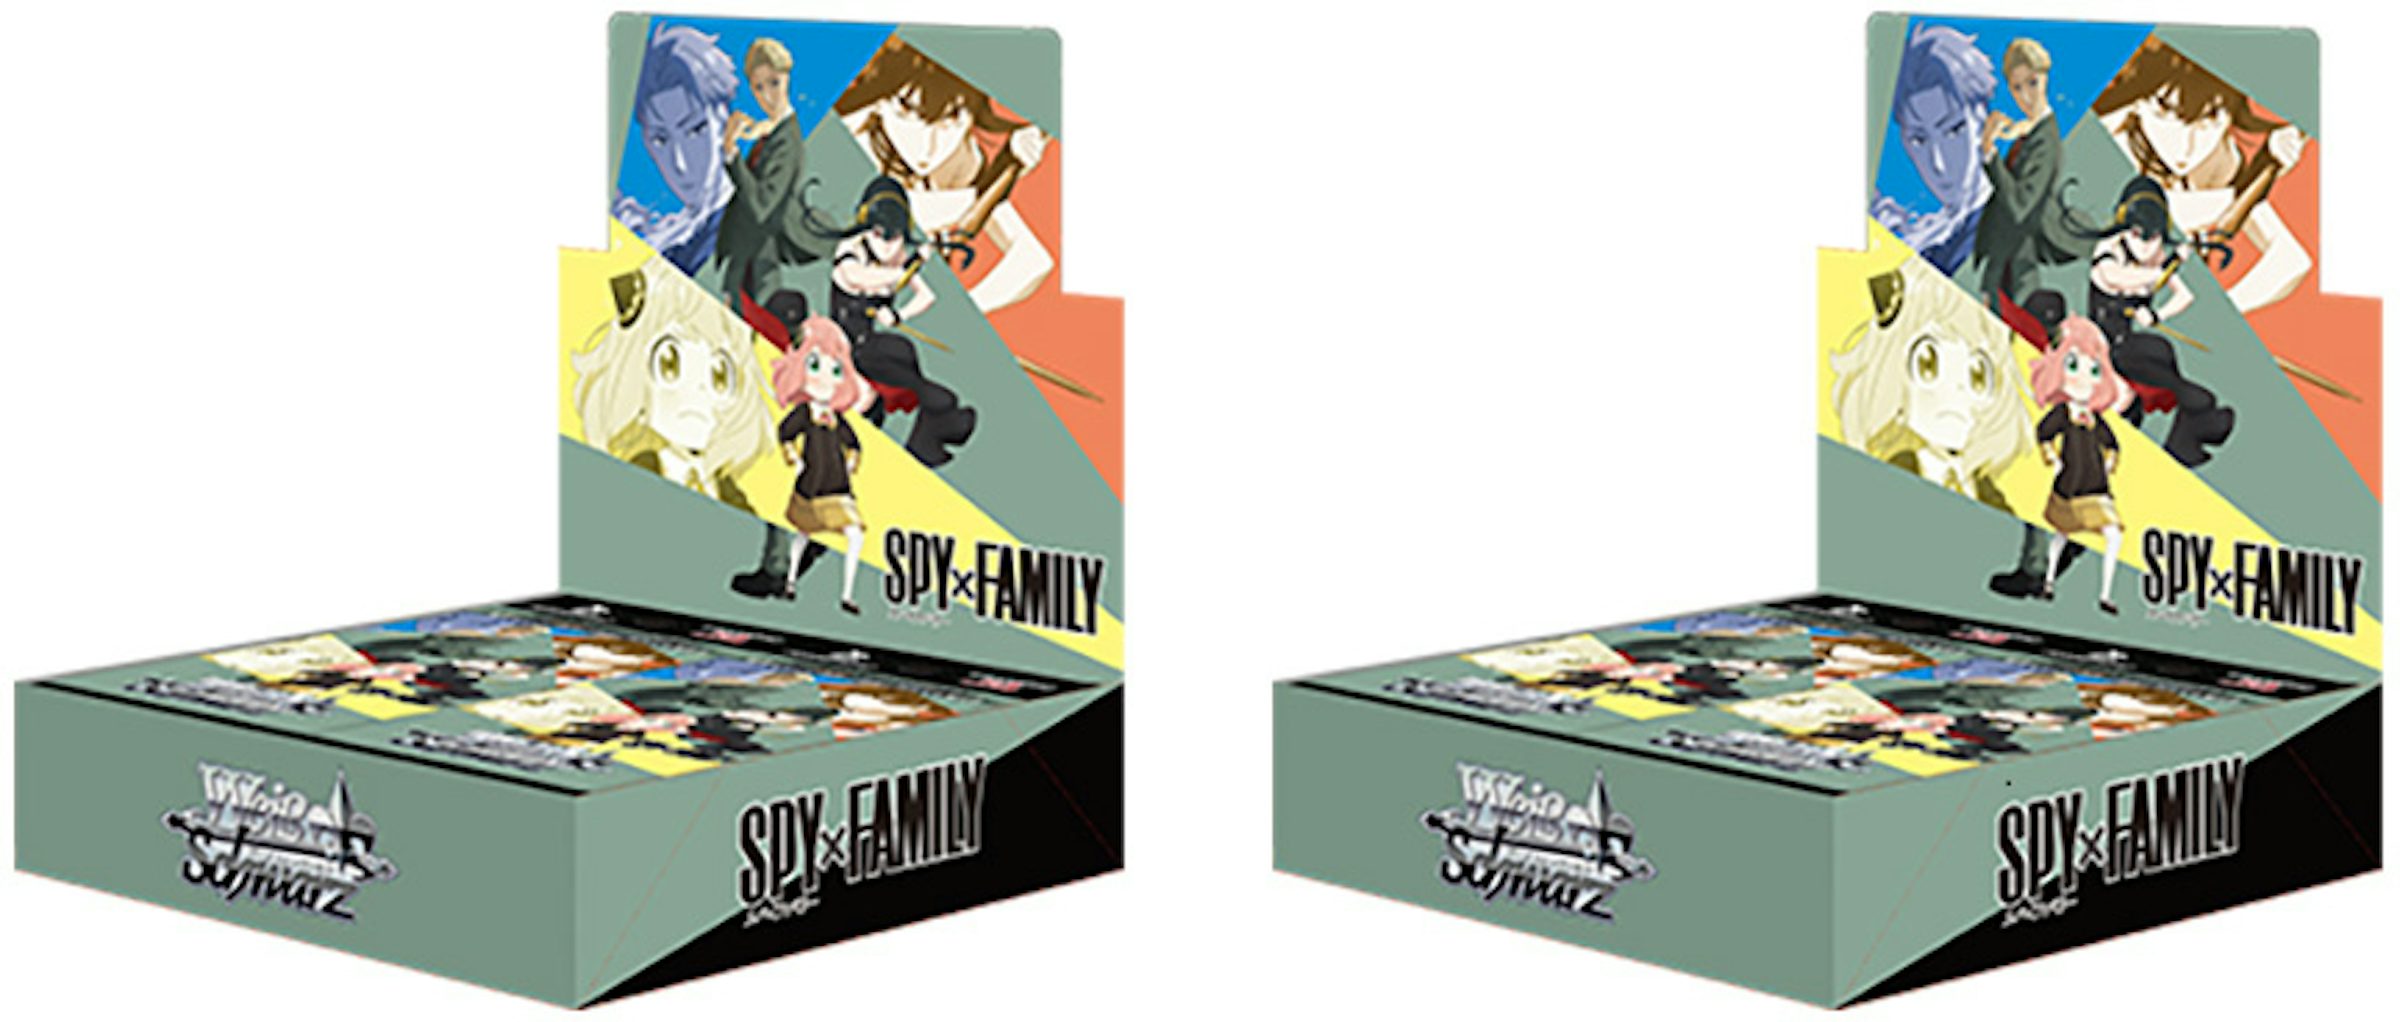 SPY X FAMILY' Sets Blu-ray & DVD Mission for June